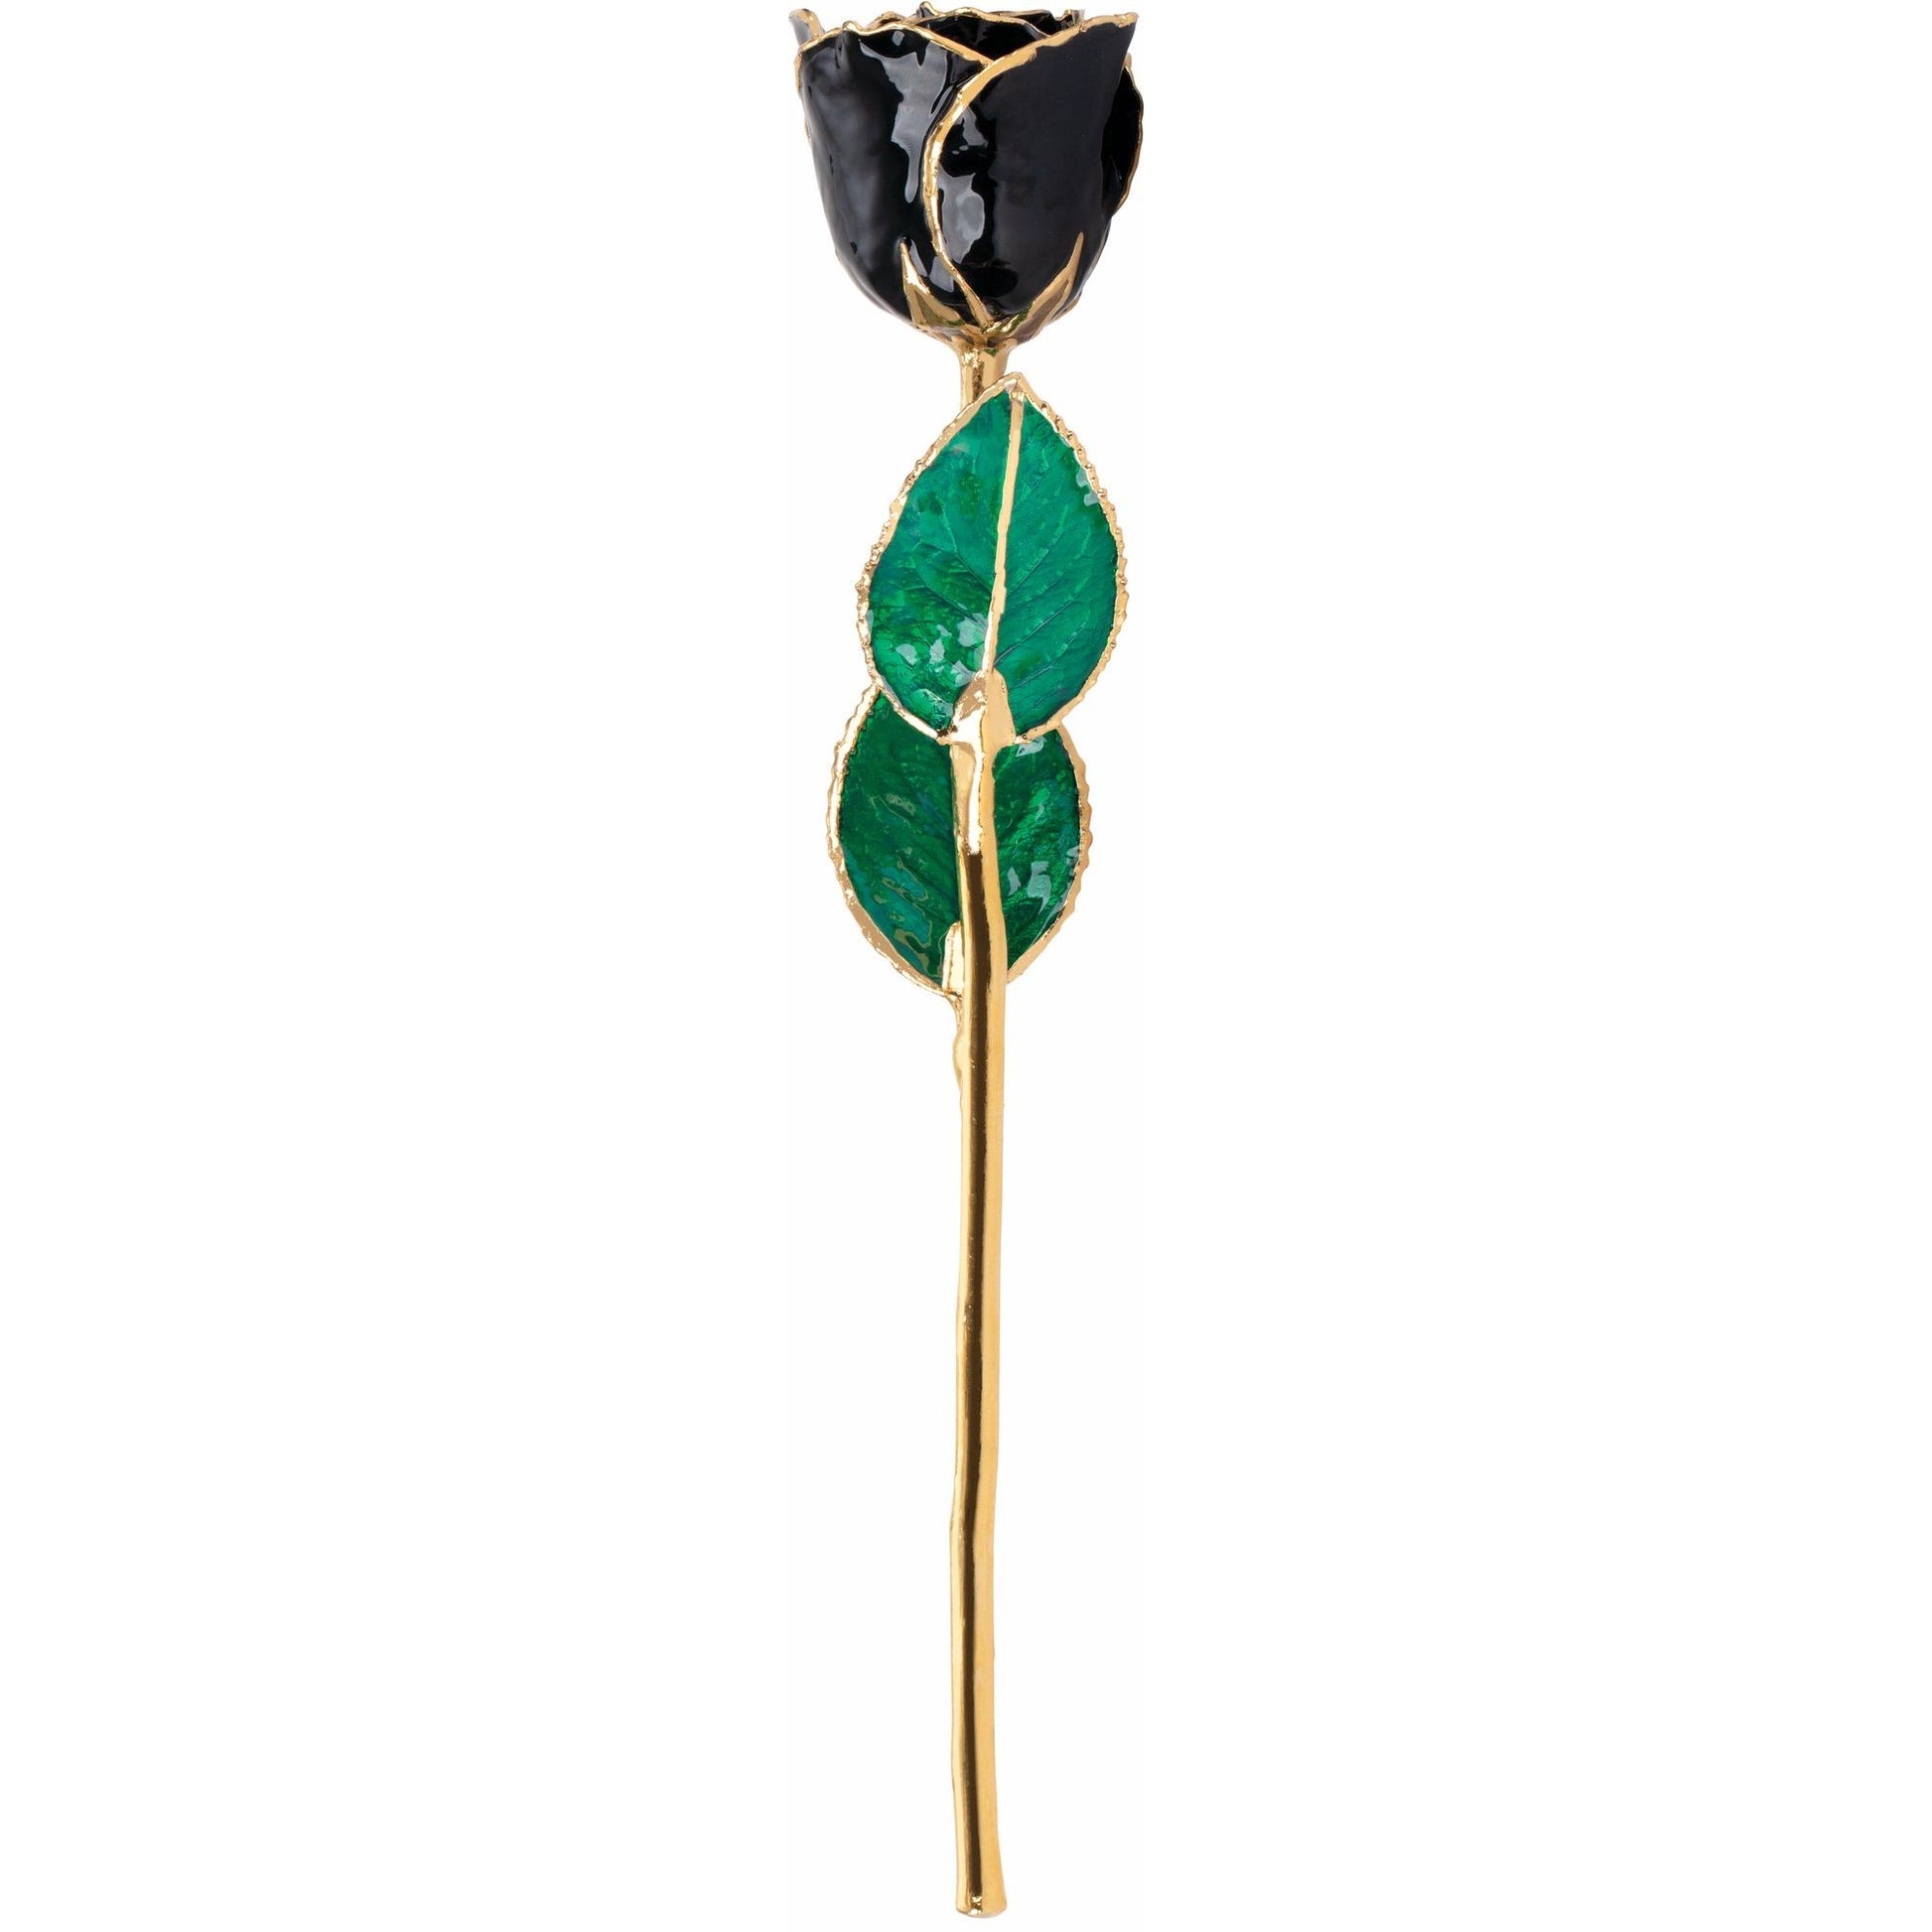 Preserved Black Rose with 24K Gold Trim for Luxury Home Decor